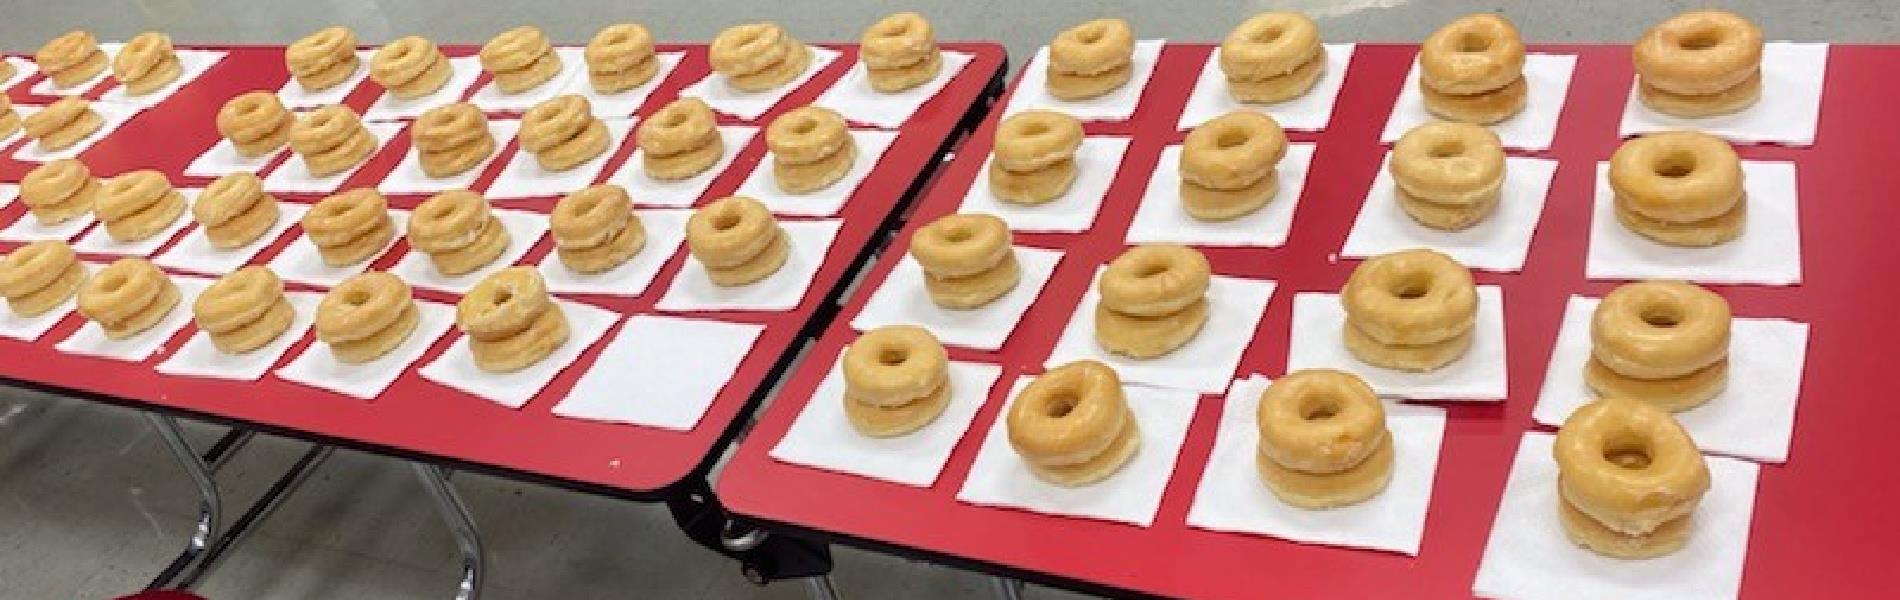 donuts for honor roll